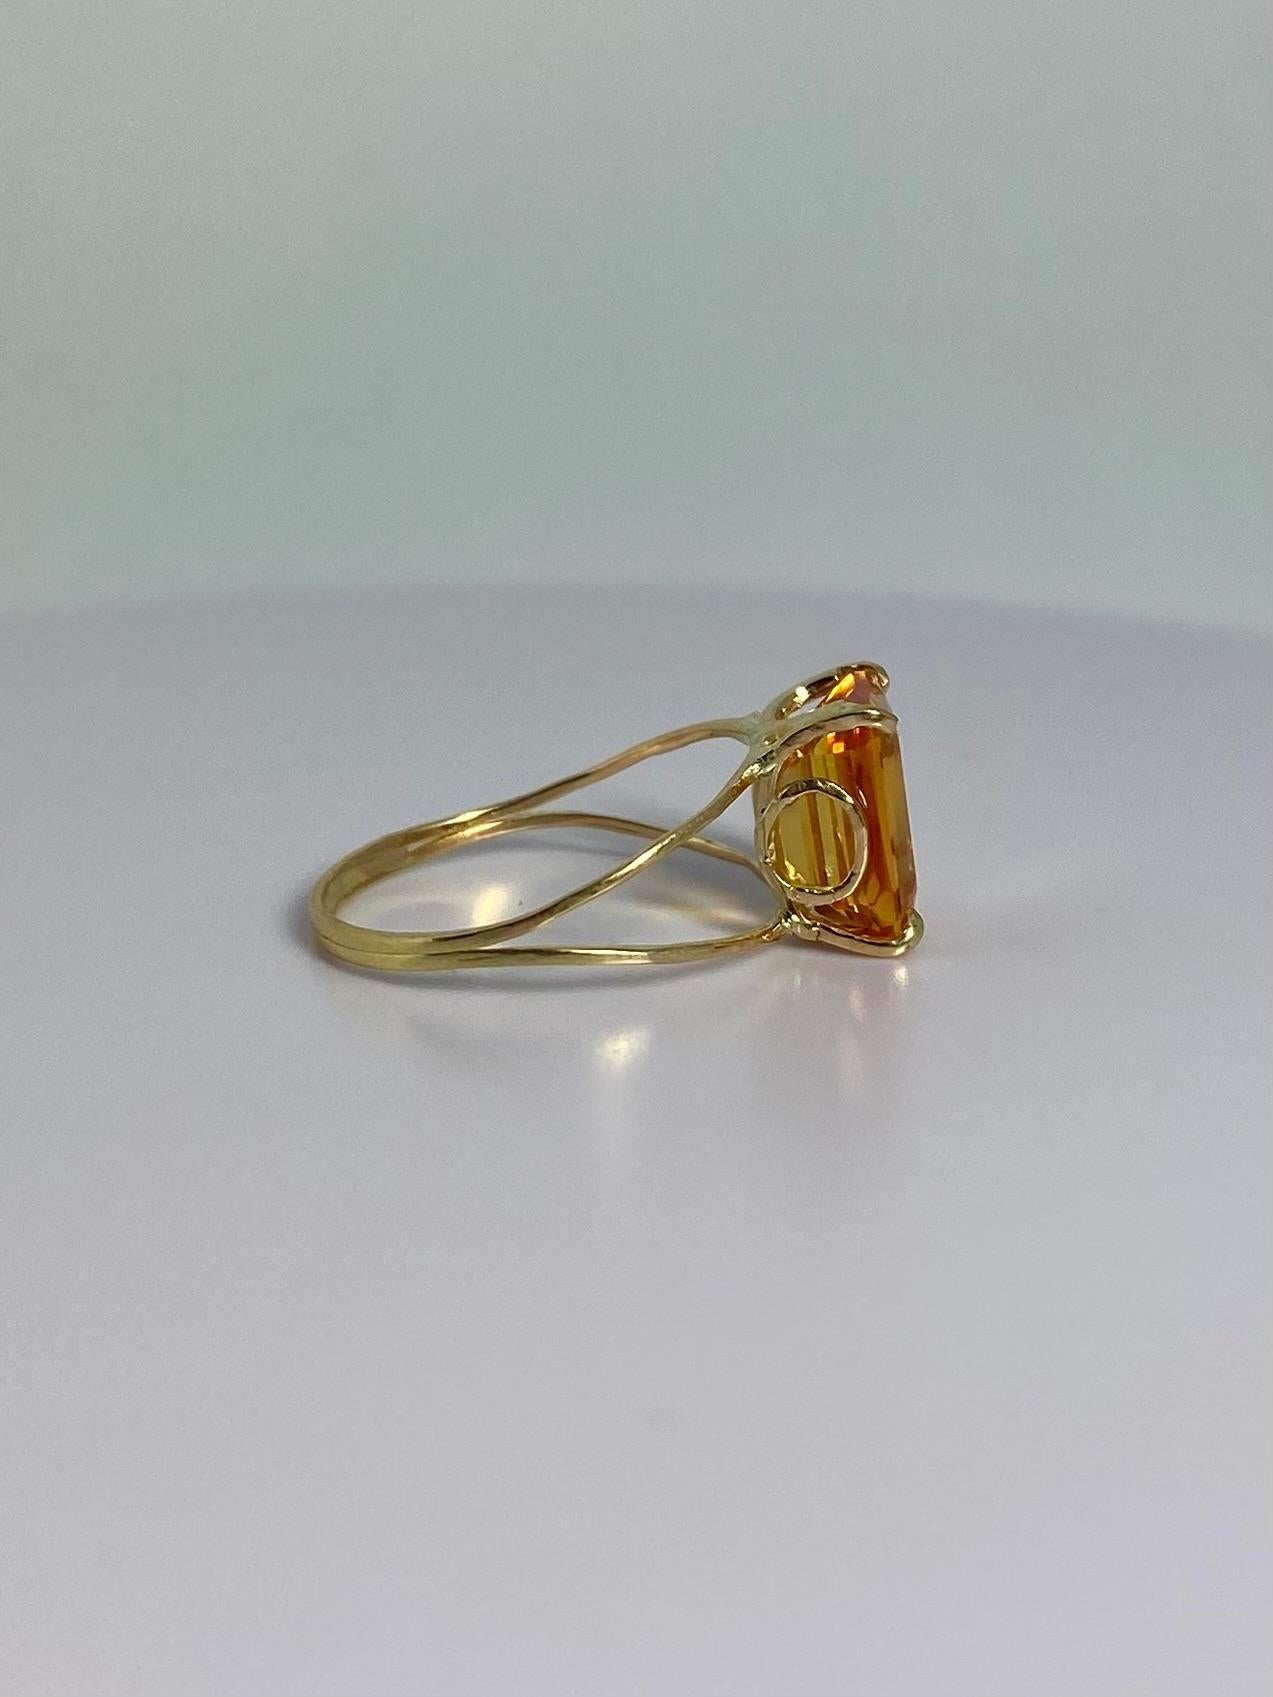 Women's Pre-loved ring made of 18 carat gold with beautiful emerald faceted citrine For Sale